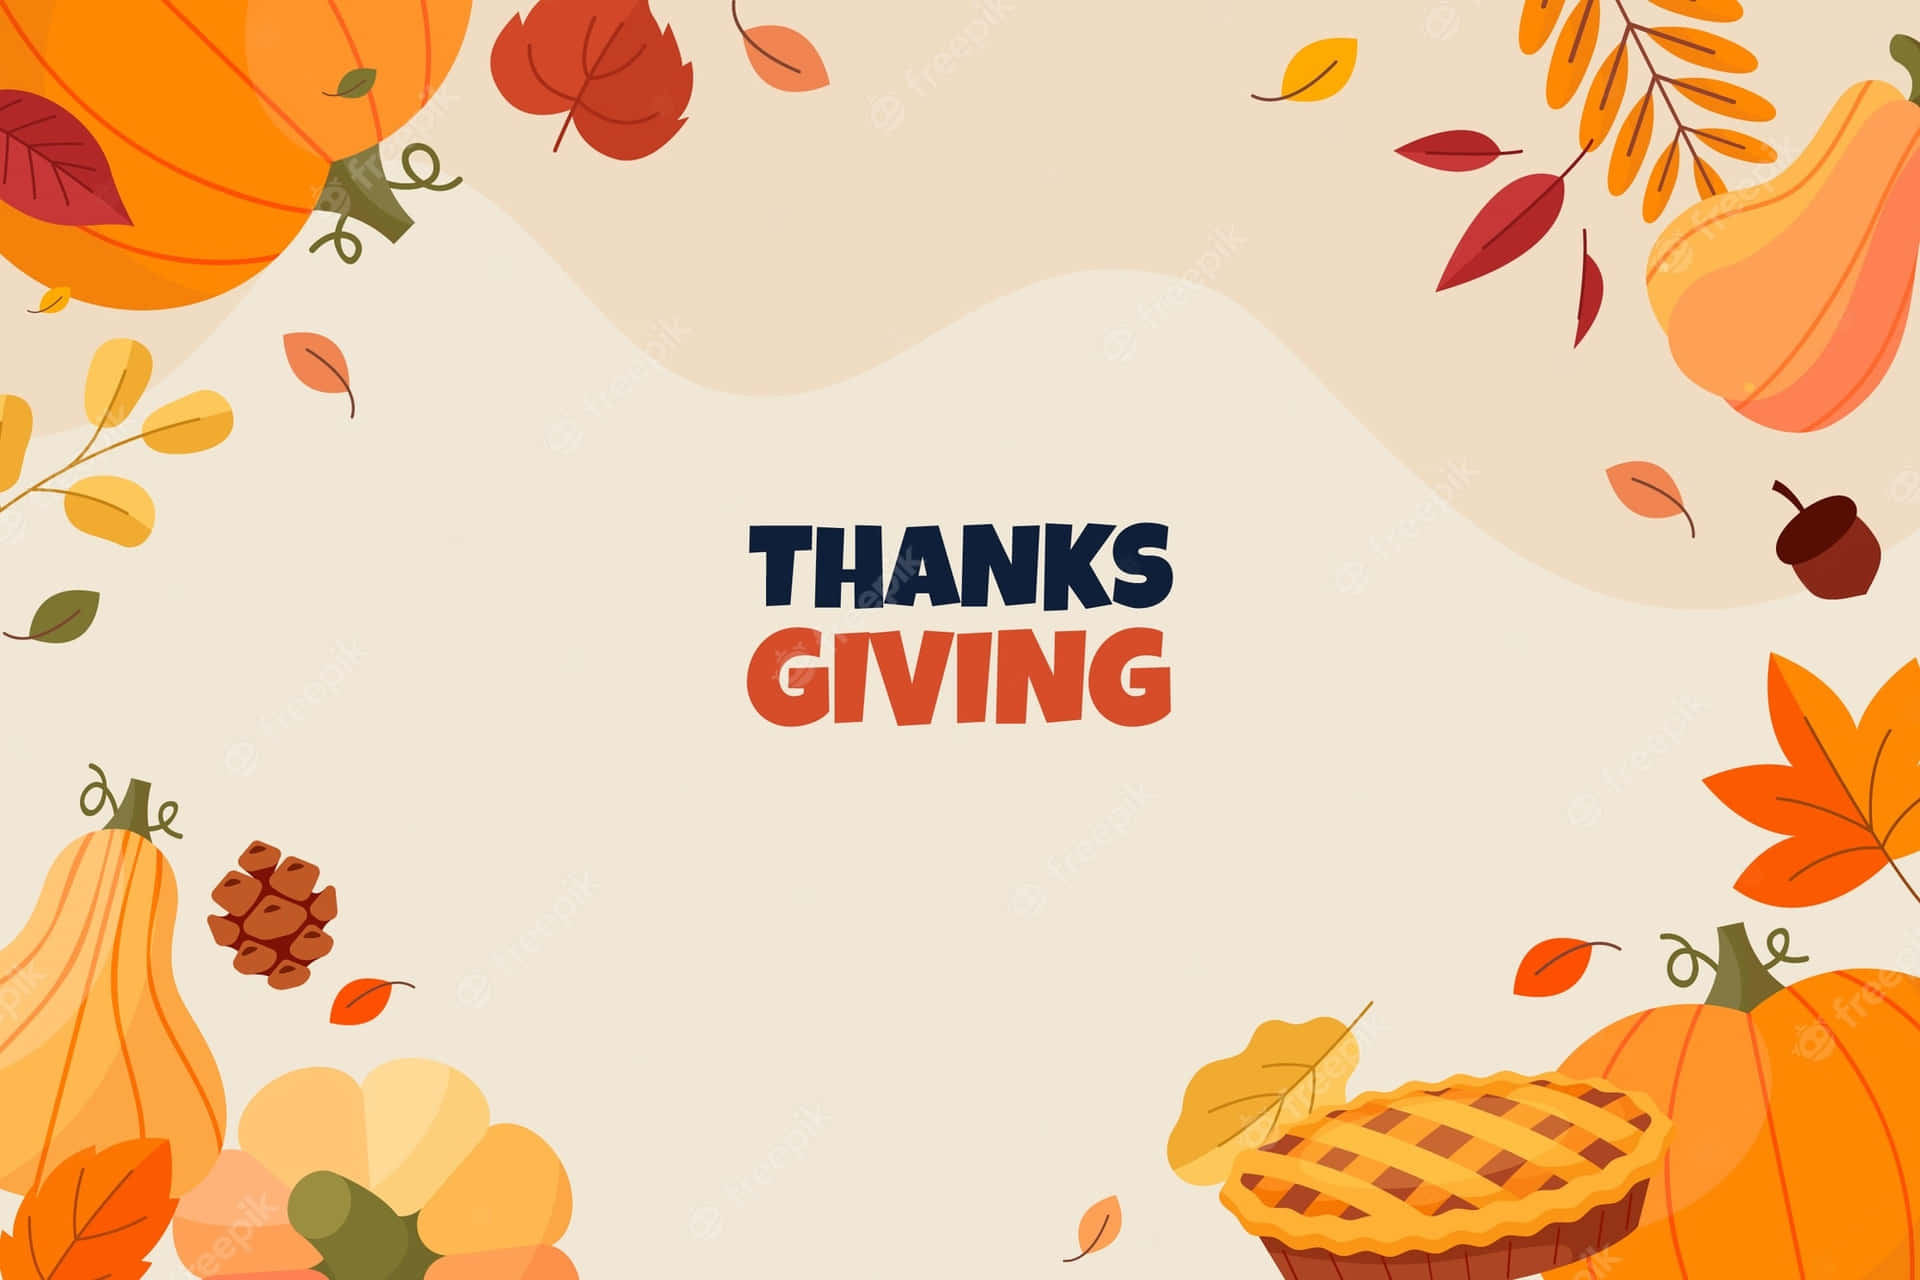 “Happy Thanksgiving everyone! Make the most of this cherished family time.” Wallpaper